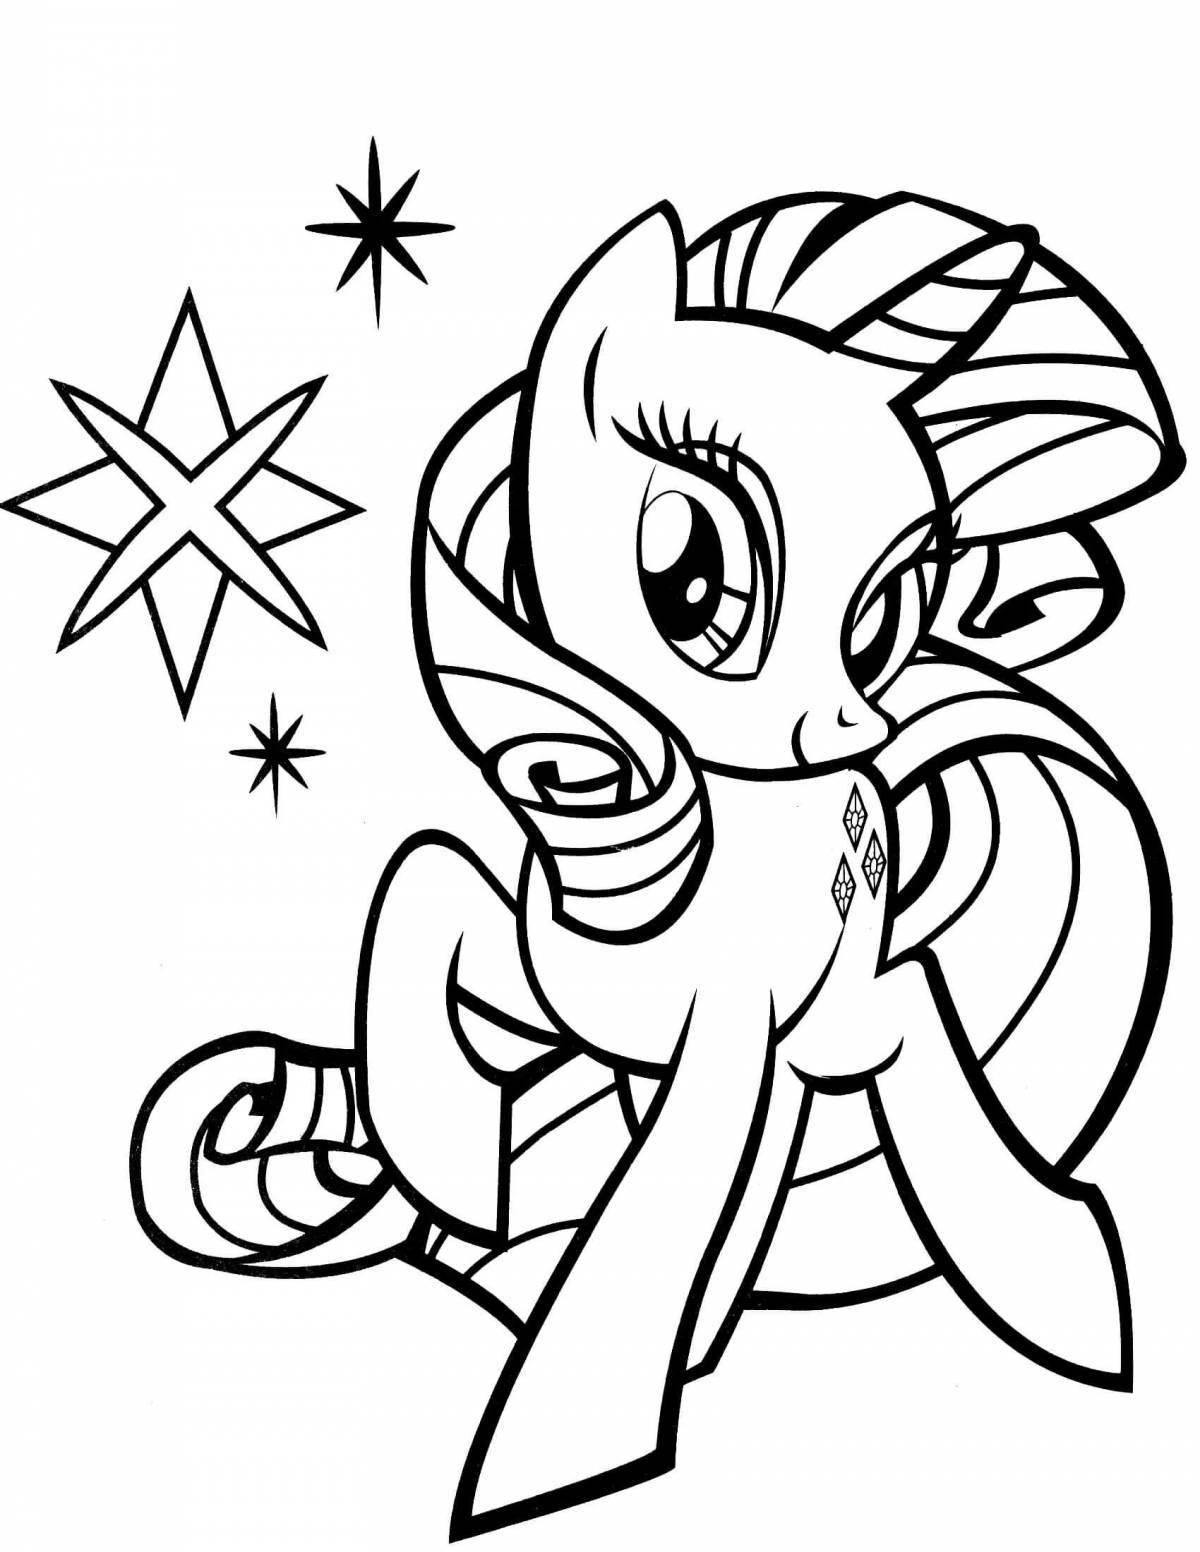 Coloring page dazzling my little pony